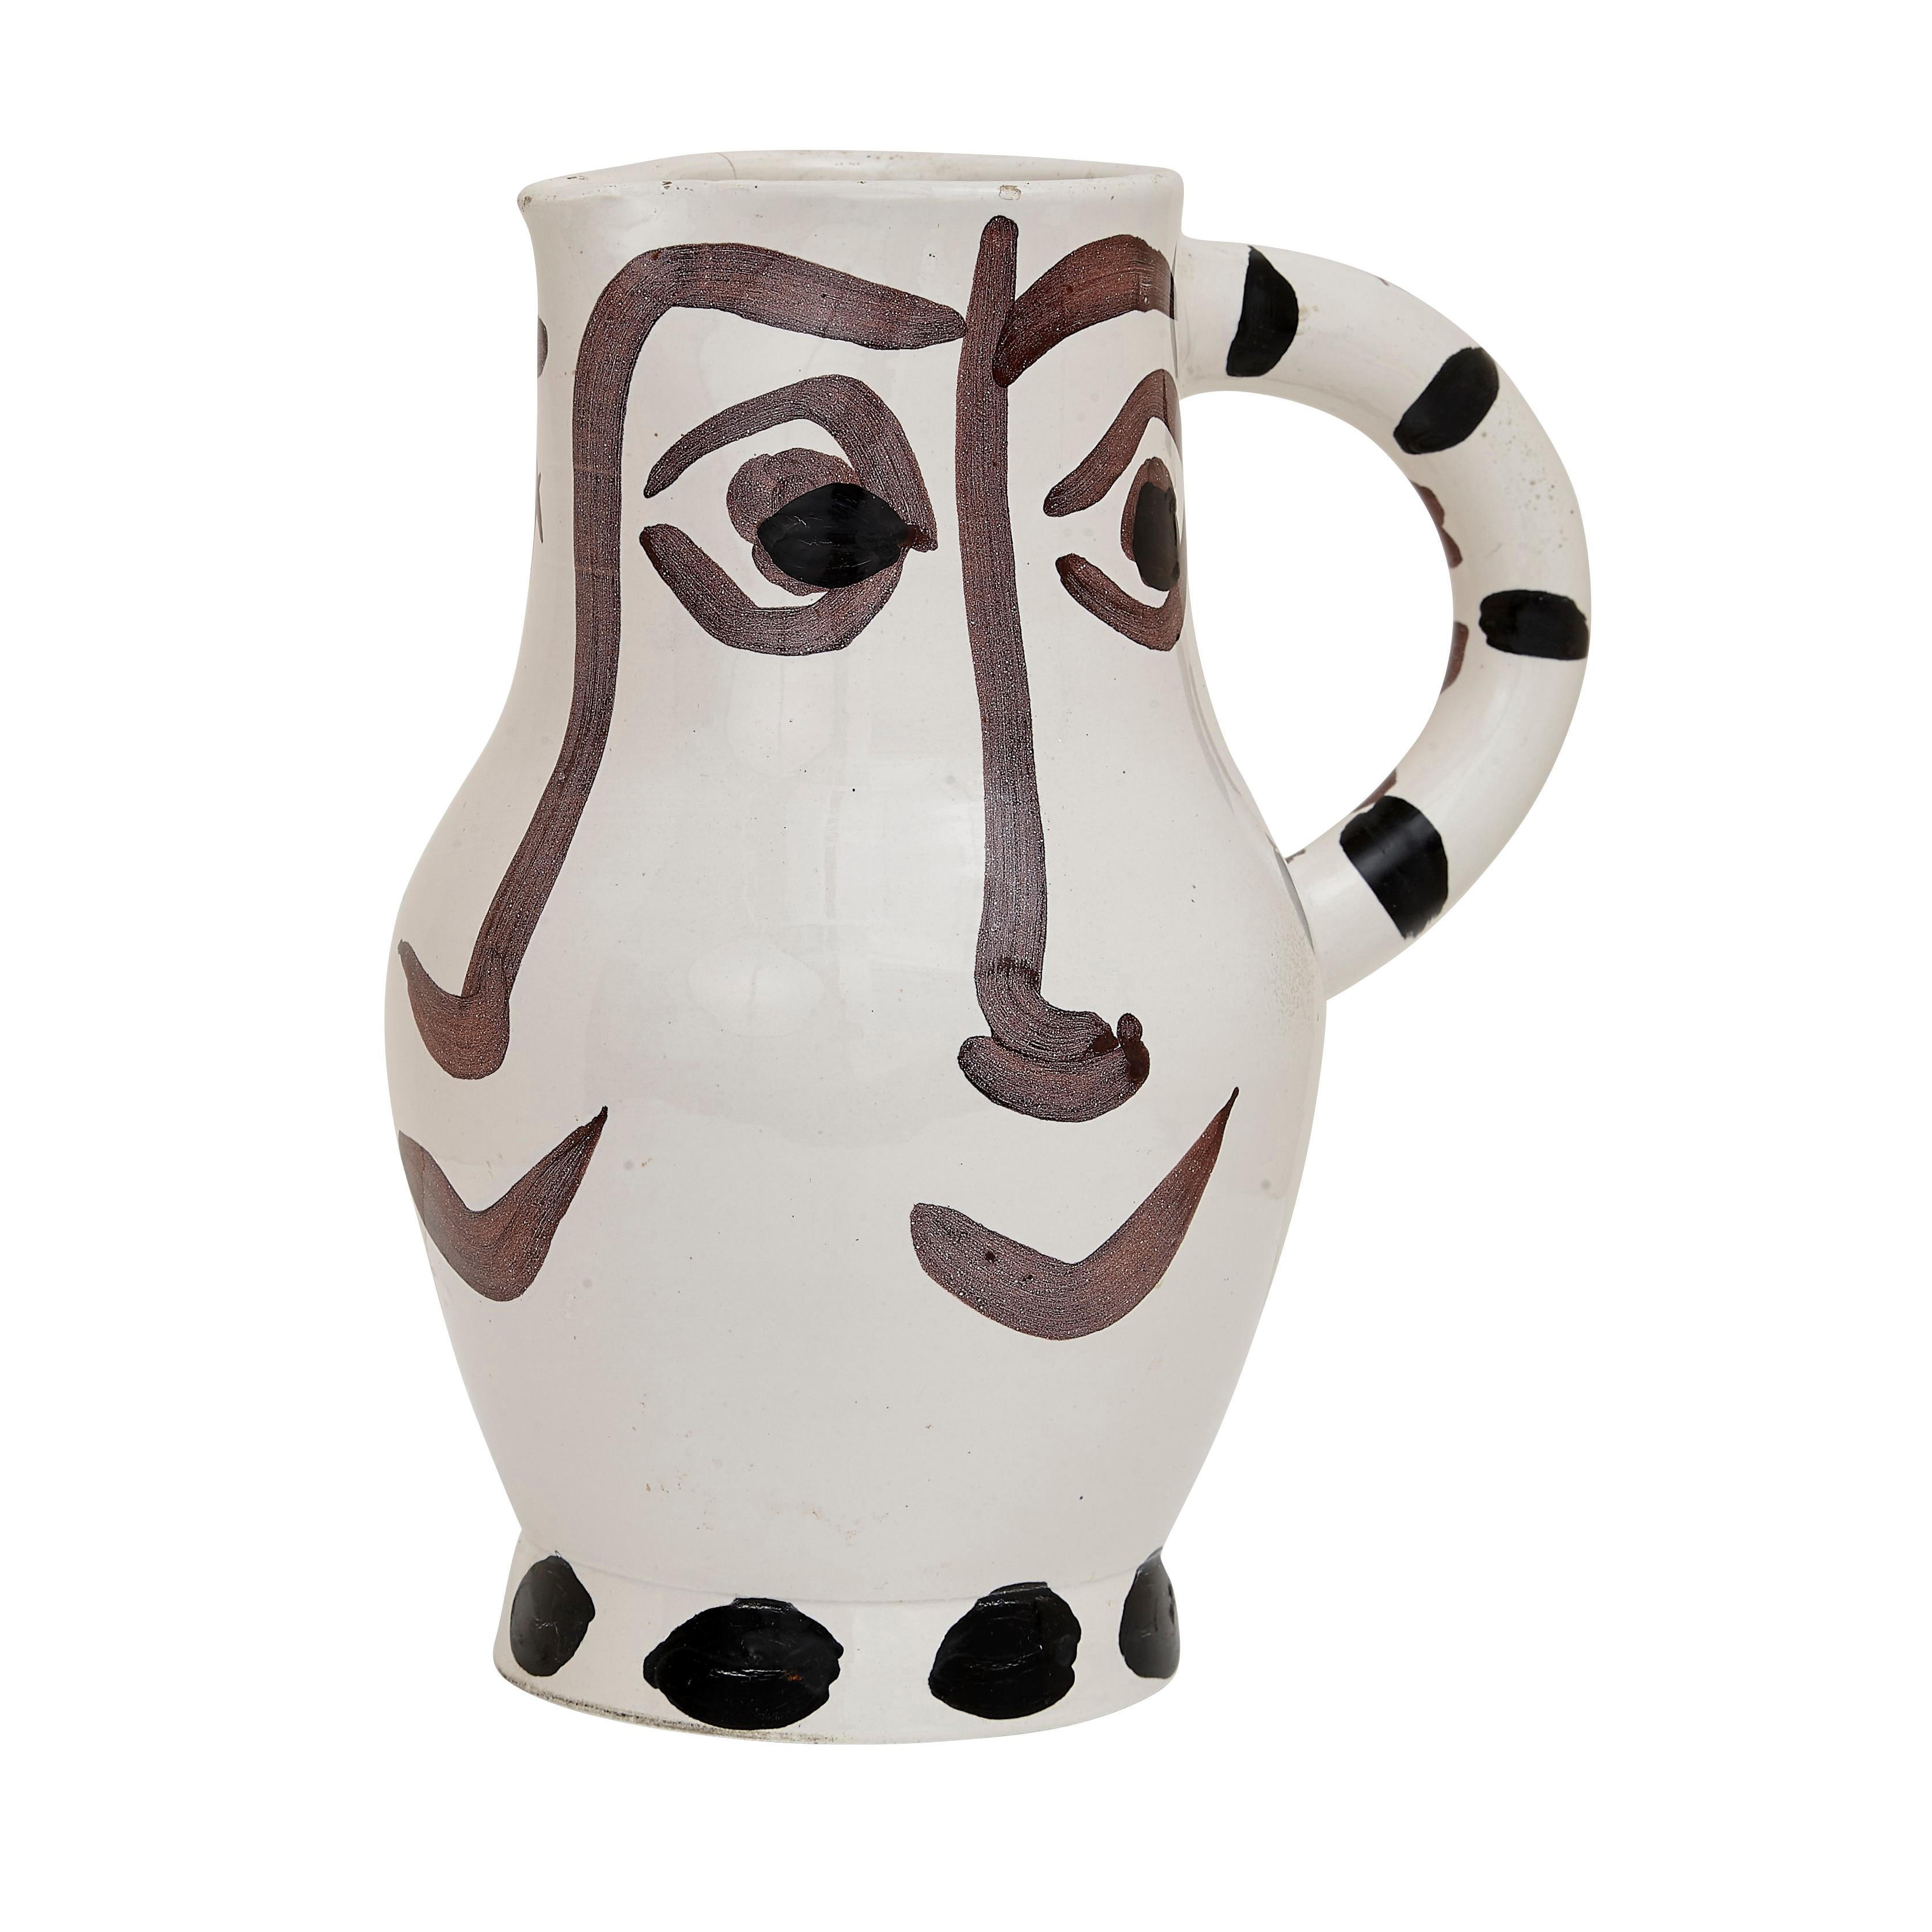 PABLO PICASSO (1881-1973) 
Quatre visages (A. R. 436)

Terre de faïence pitcher, 1959, numbered 216/300, inscribed 'Edition Picasso' and 'Madoura', glazed and painted, with the Edition Picasso and Madoura stamps.